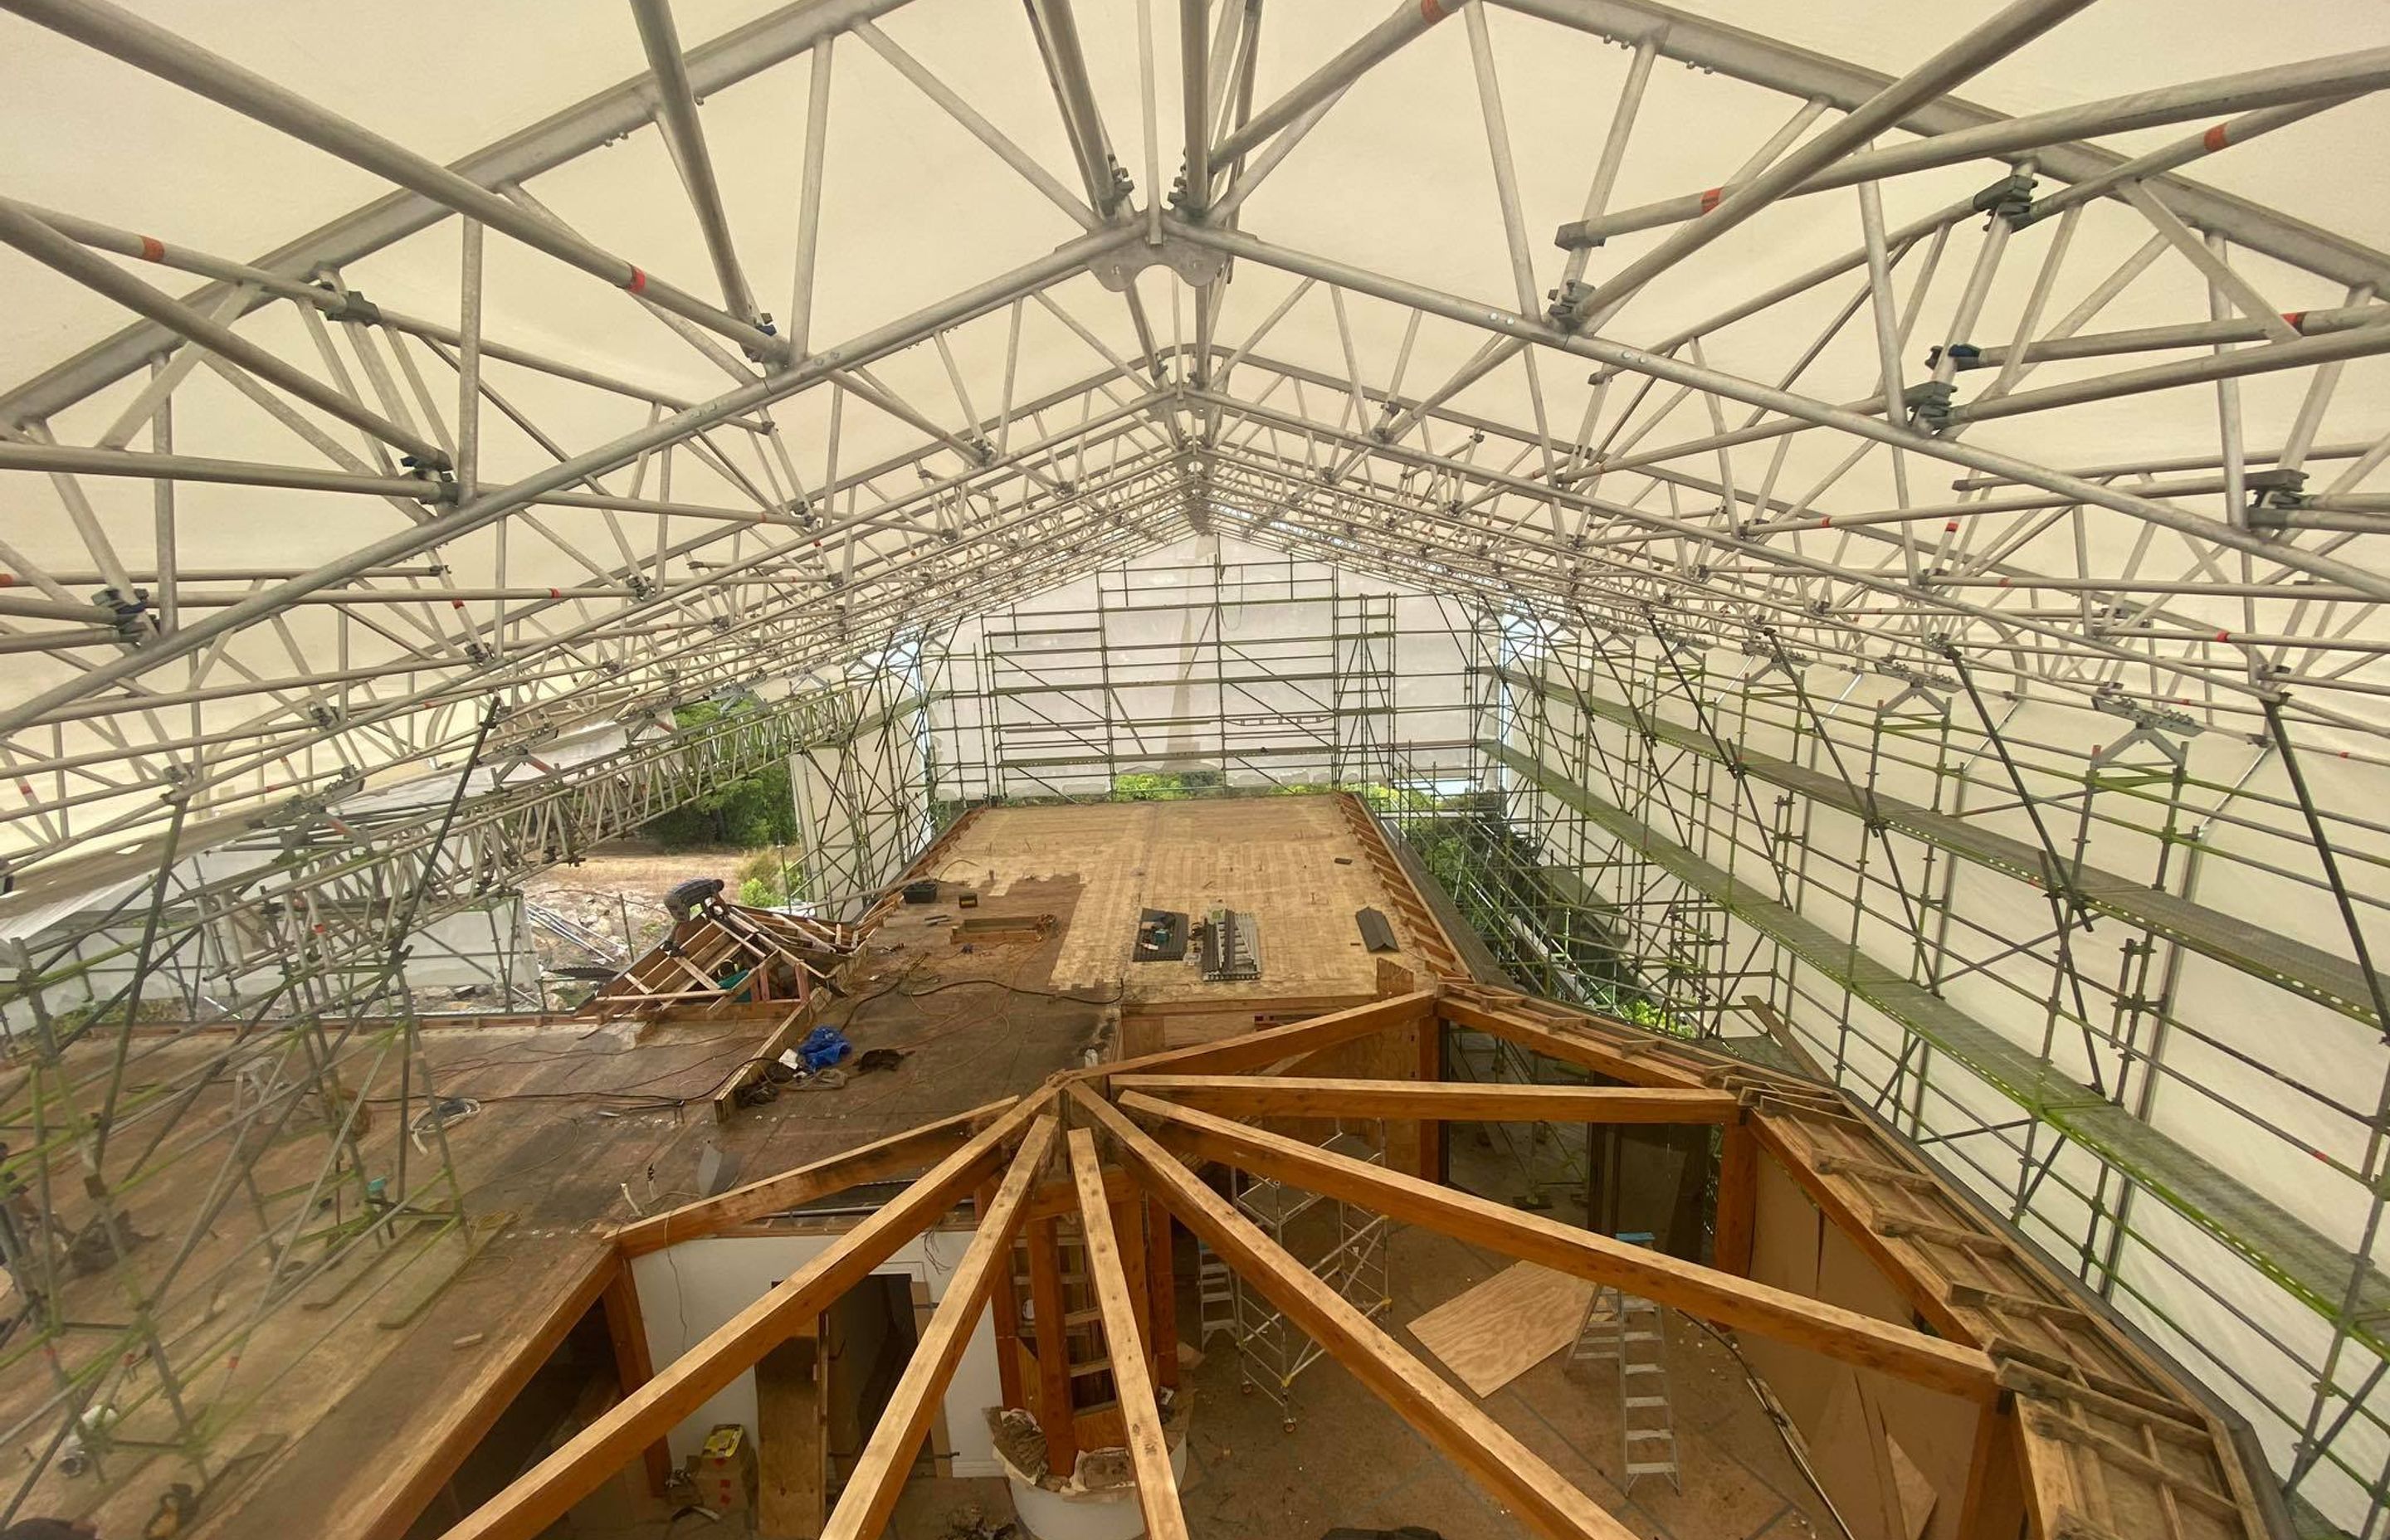 "Green Construction" Temporary Roof System
